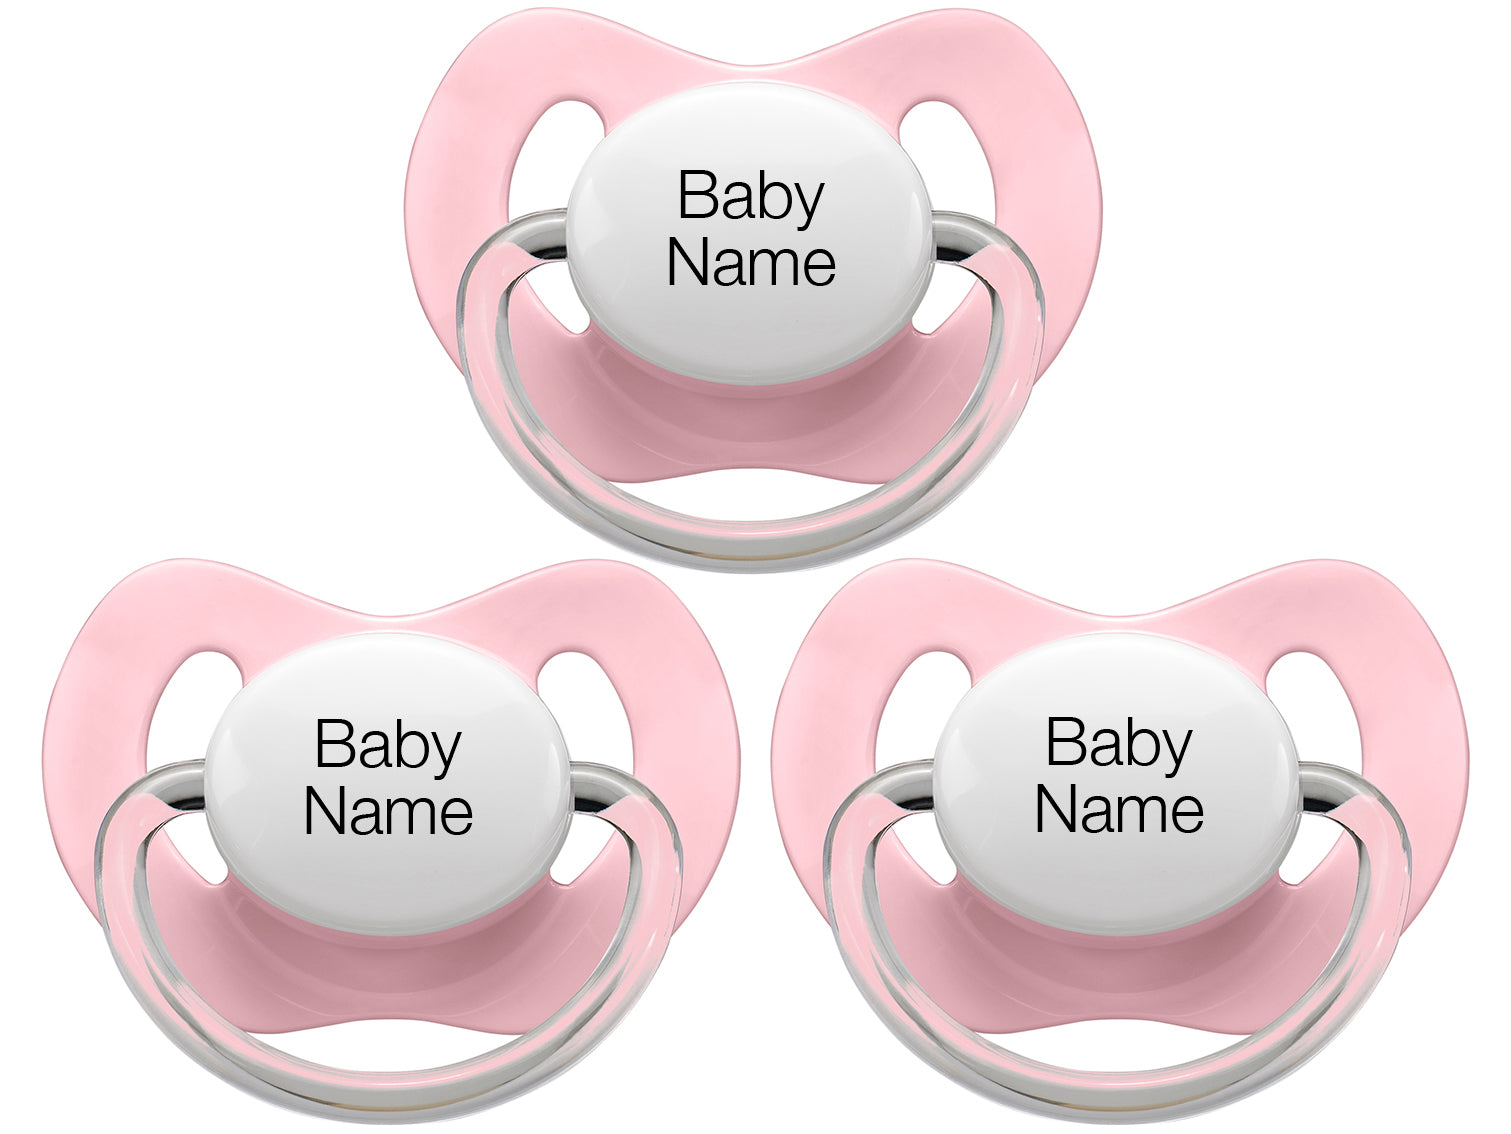 Personalised Pacifiers 3 pcs. Pink